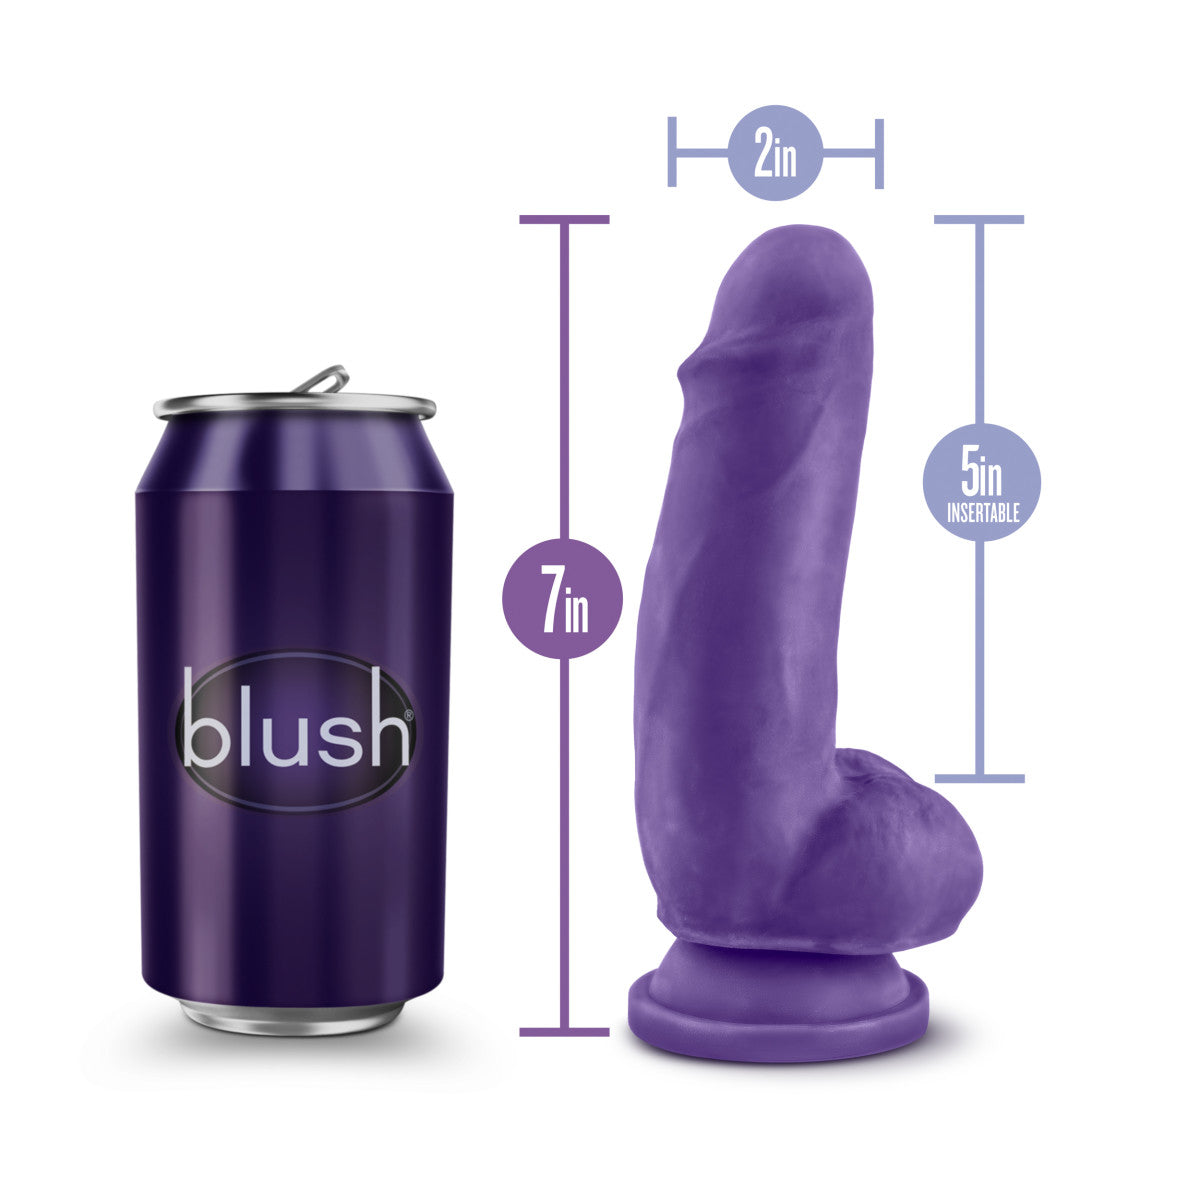 Purple realistic dildo with a rounded head, veins along a slightly downwardly curved shaft, realistic balls, and a suction cup base. Additional images show alternate angles.